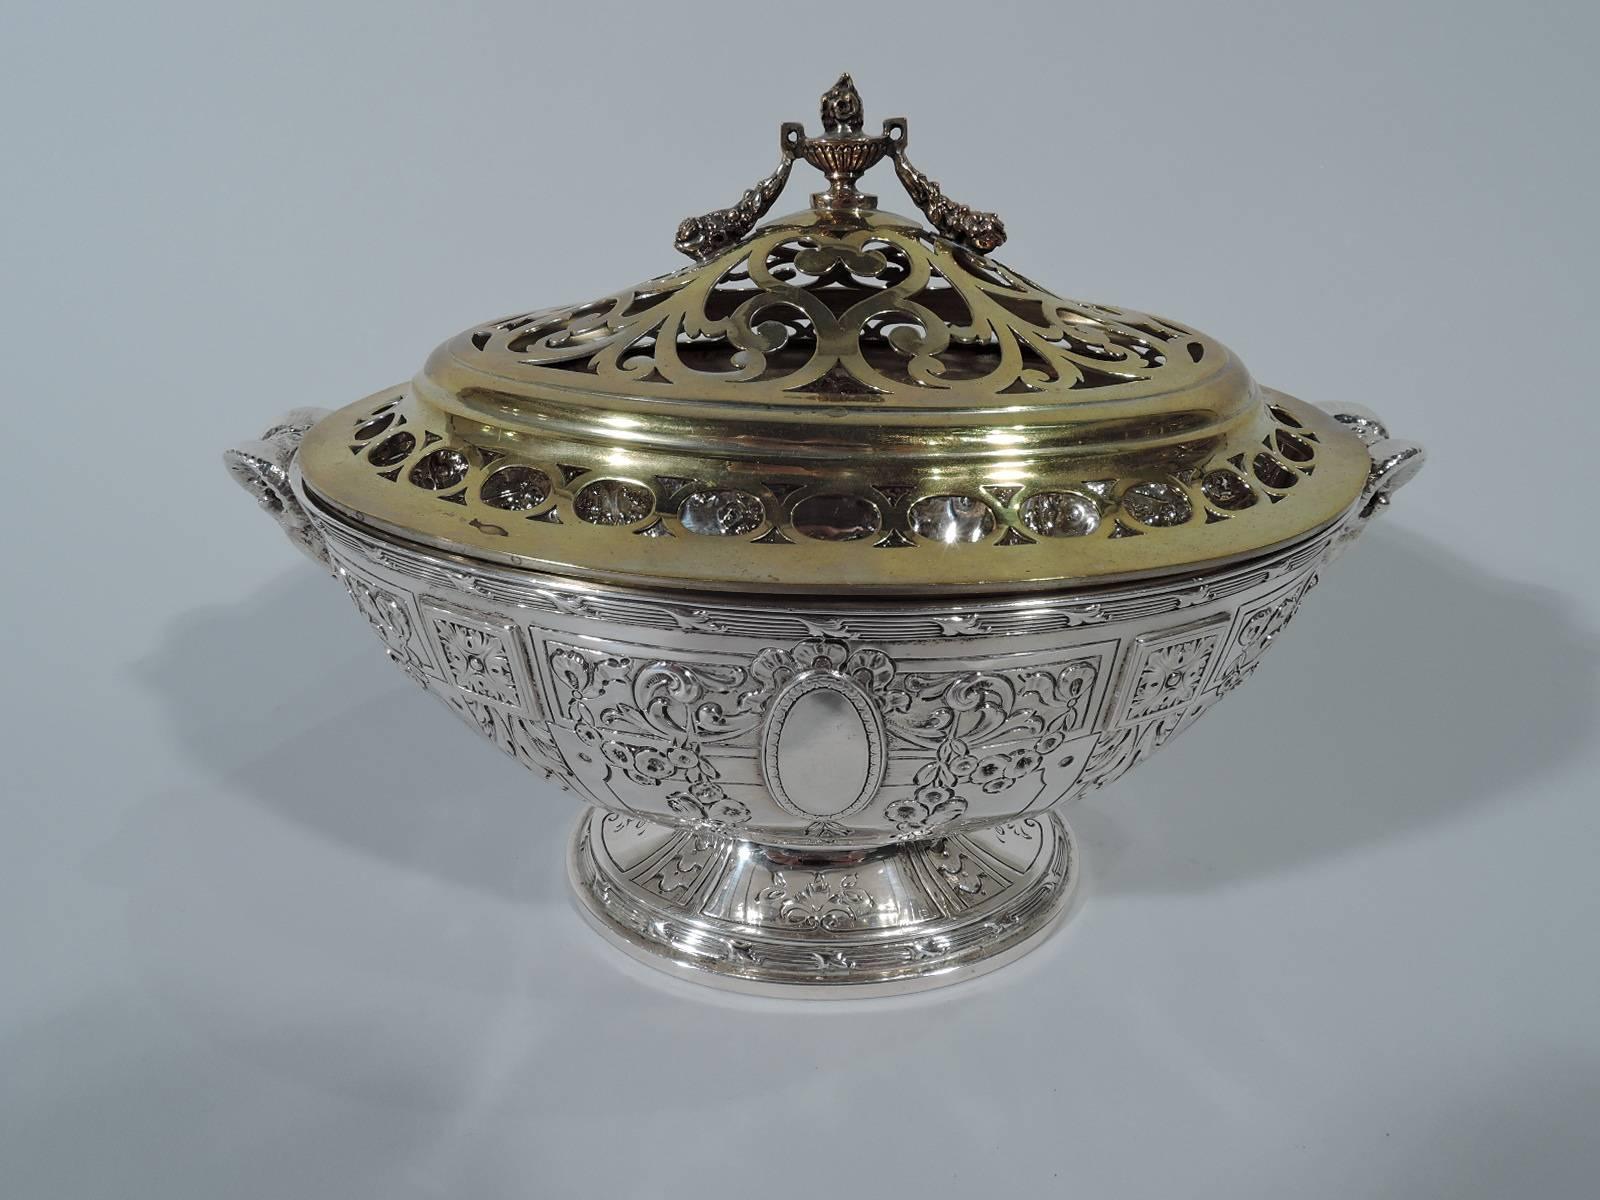 Edwardian neoclassical sterling silver flower bowl. Made by Galt & Bro., Inc. in Washington DC. Tureen-form with oval bowl and raised foot. Chased and engraved Adams-style ornament with pilasters, garlands, ribbon, and oval medallions (vacant).